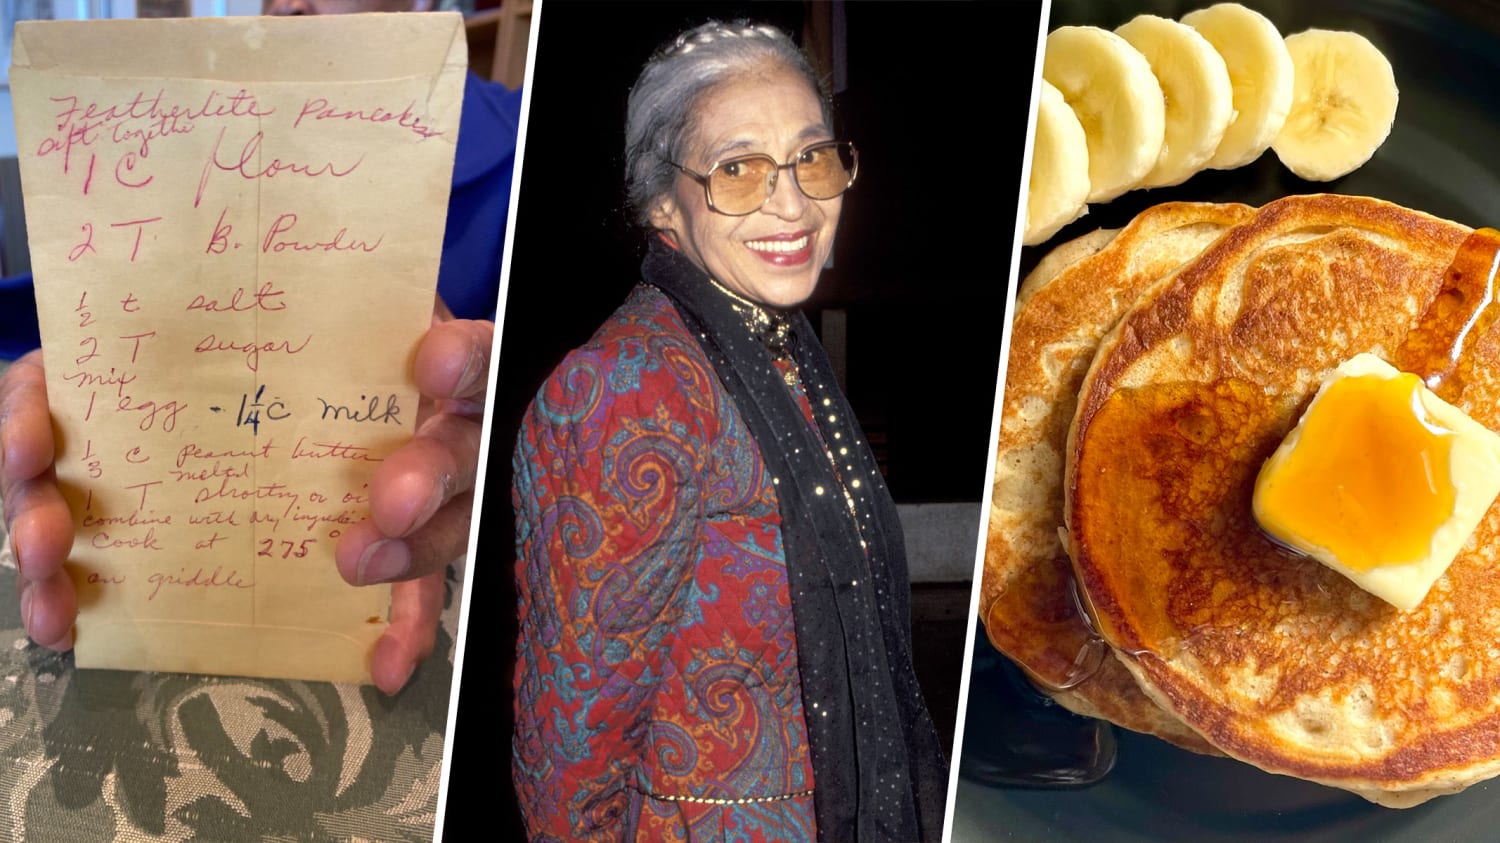 The Library of Congress posted Rosa Parks’ ‘Featherlite’ pancake recipe, so I tried it 